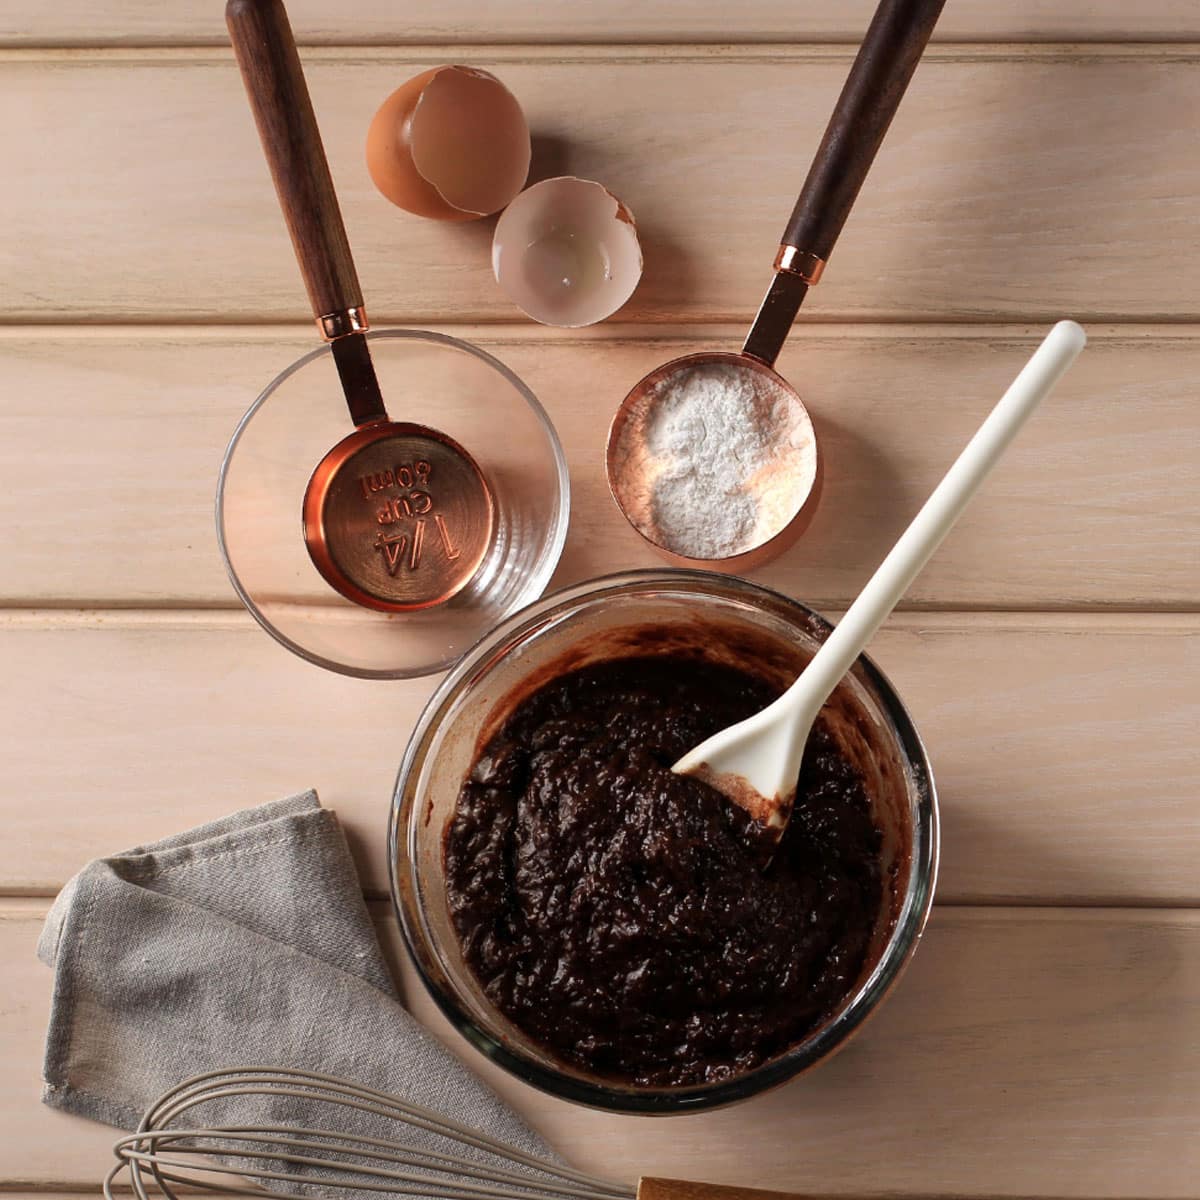 Every ingredient plays a crucial role in the outcome, and skimping on quality can result in a subpar brownie experience.